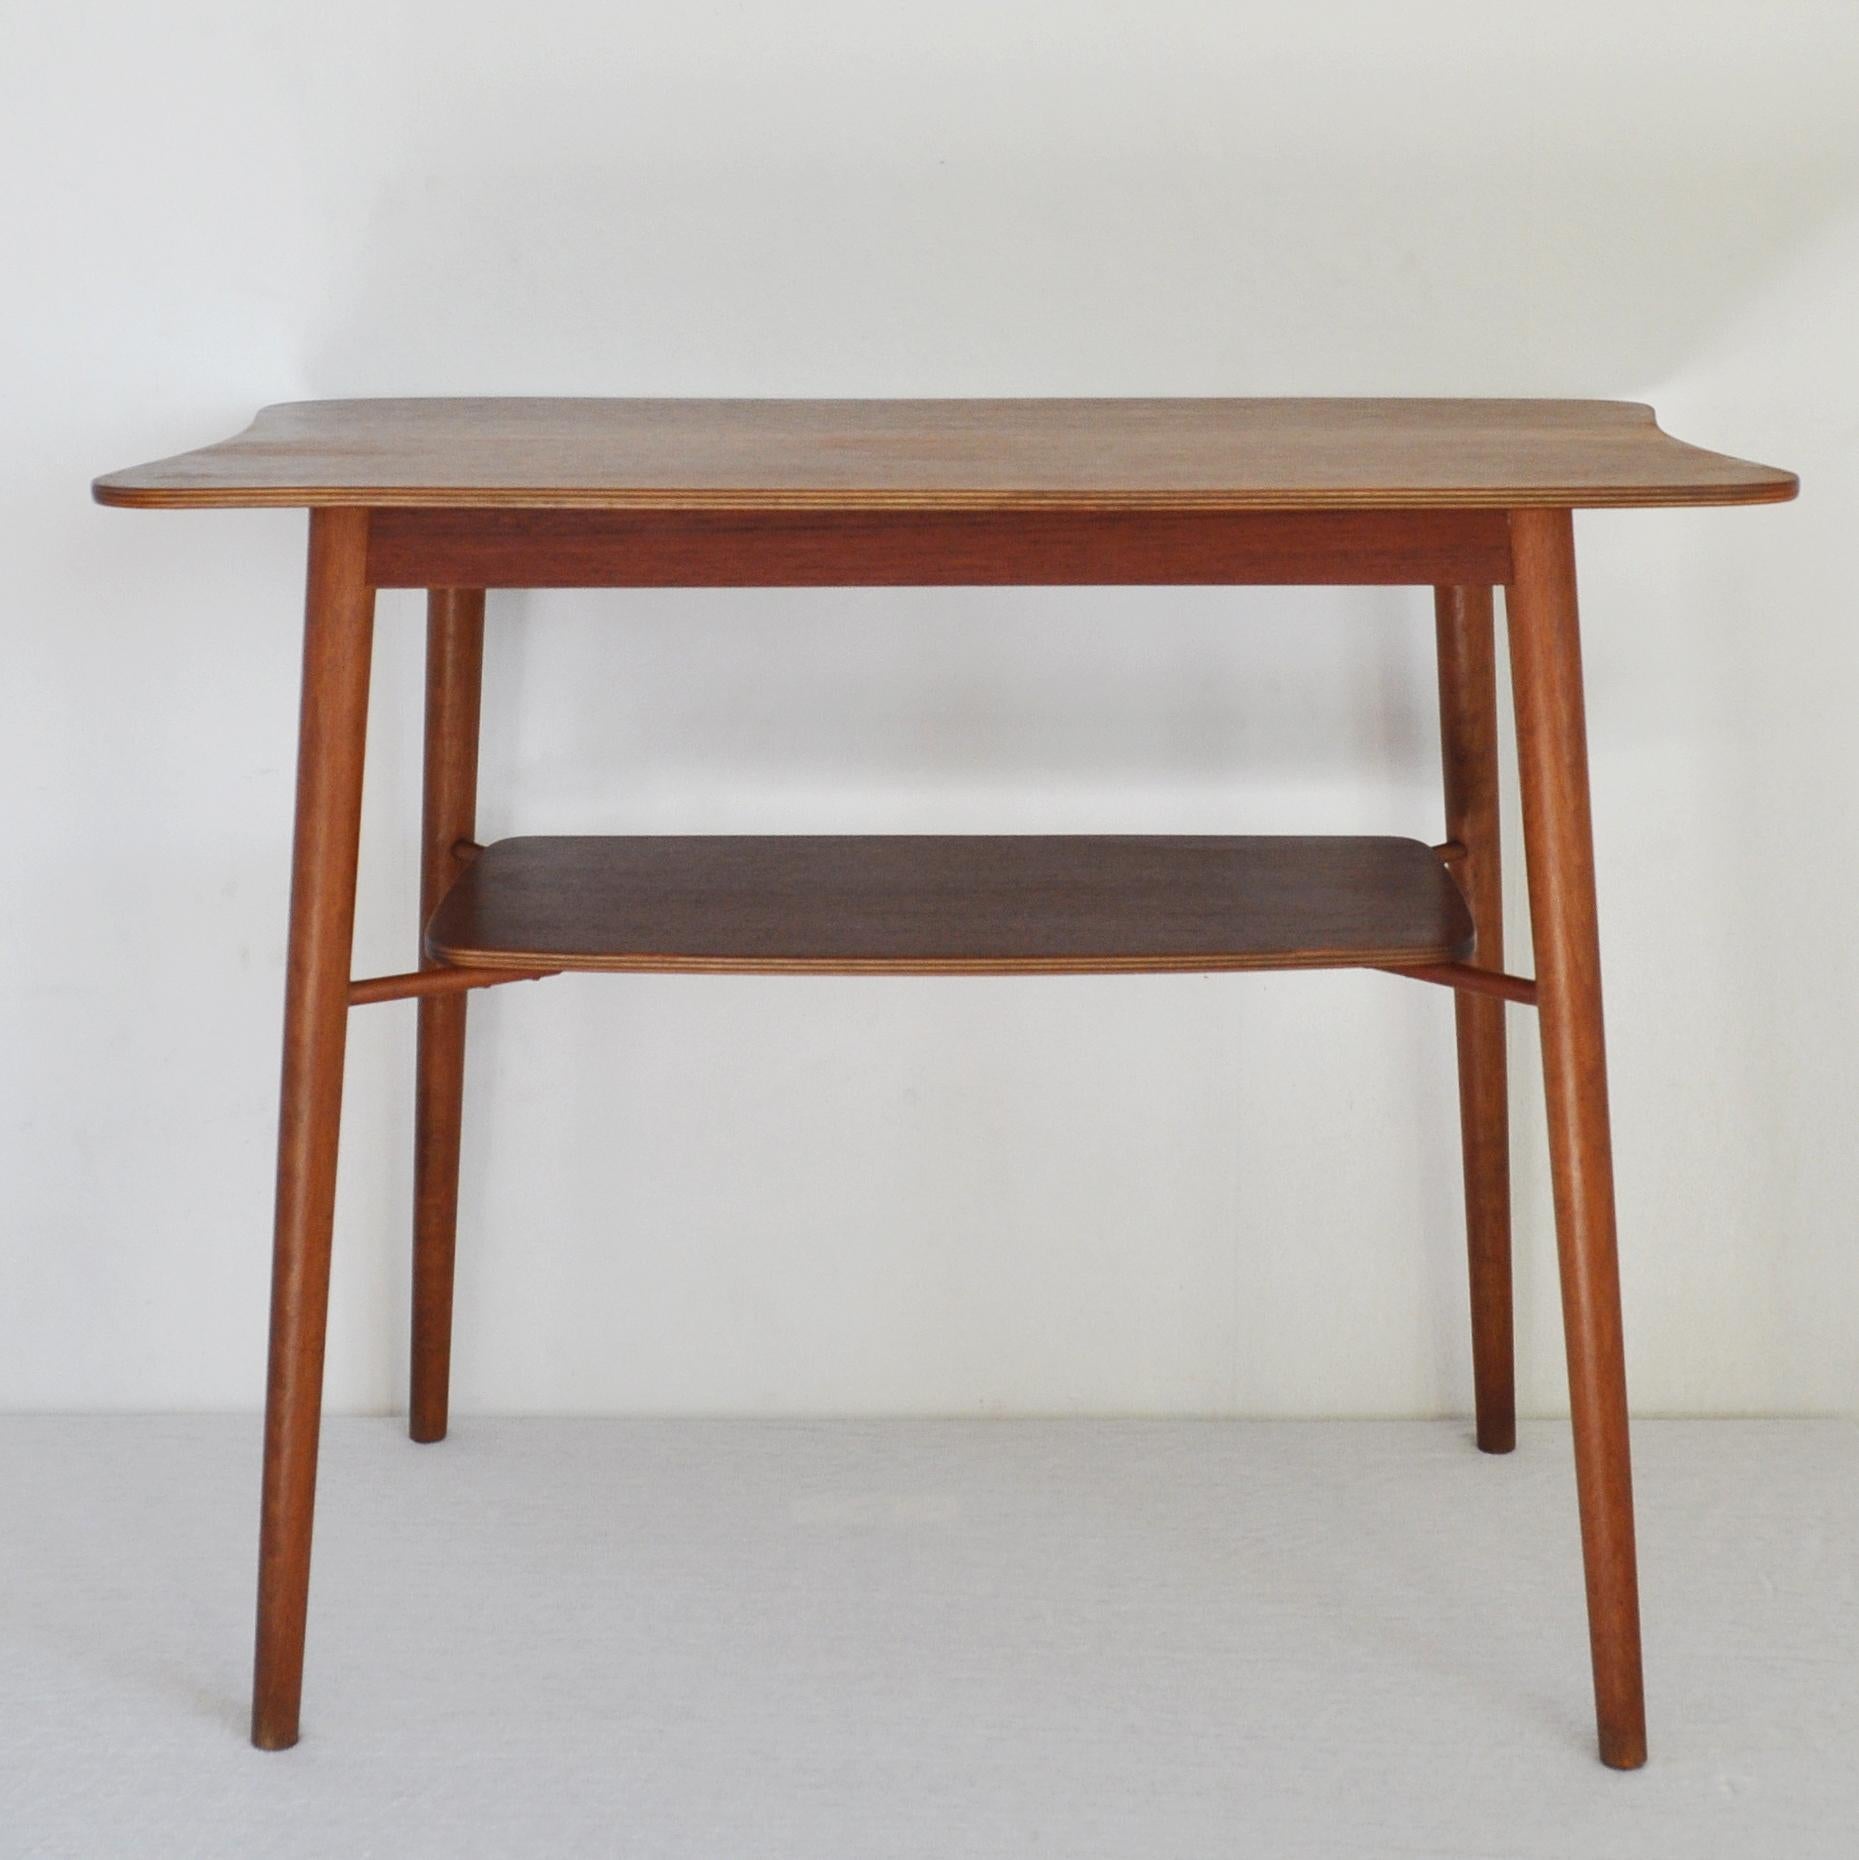 Danish occasional teak side table with an organic shape made in the 1960s.
Can be used as a bedside or occasional table. Little veneer repair, see picture 9.
Good vintage condition.

Dimensions: 
Height 50.5 cm
Width 64 cm 
Depth 38 cm.